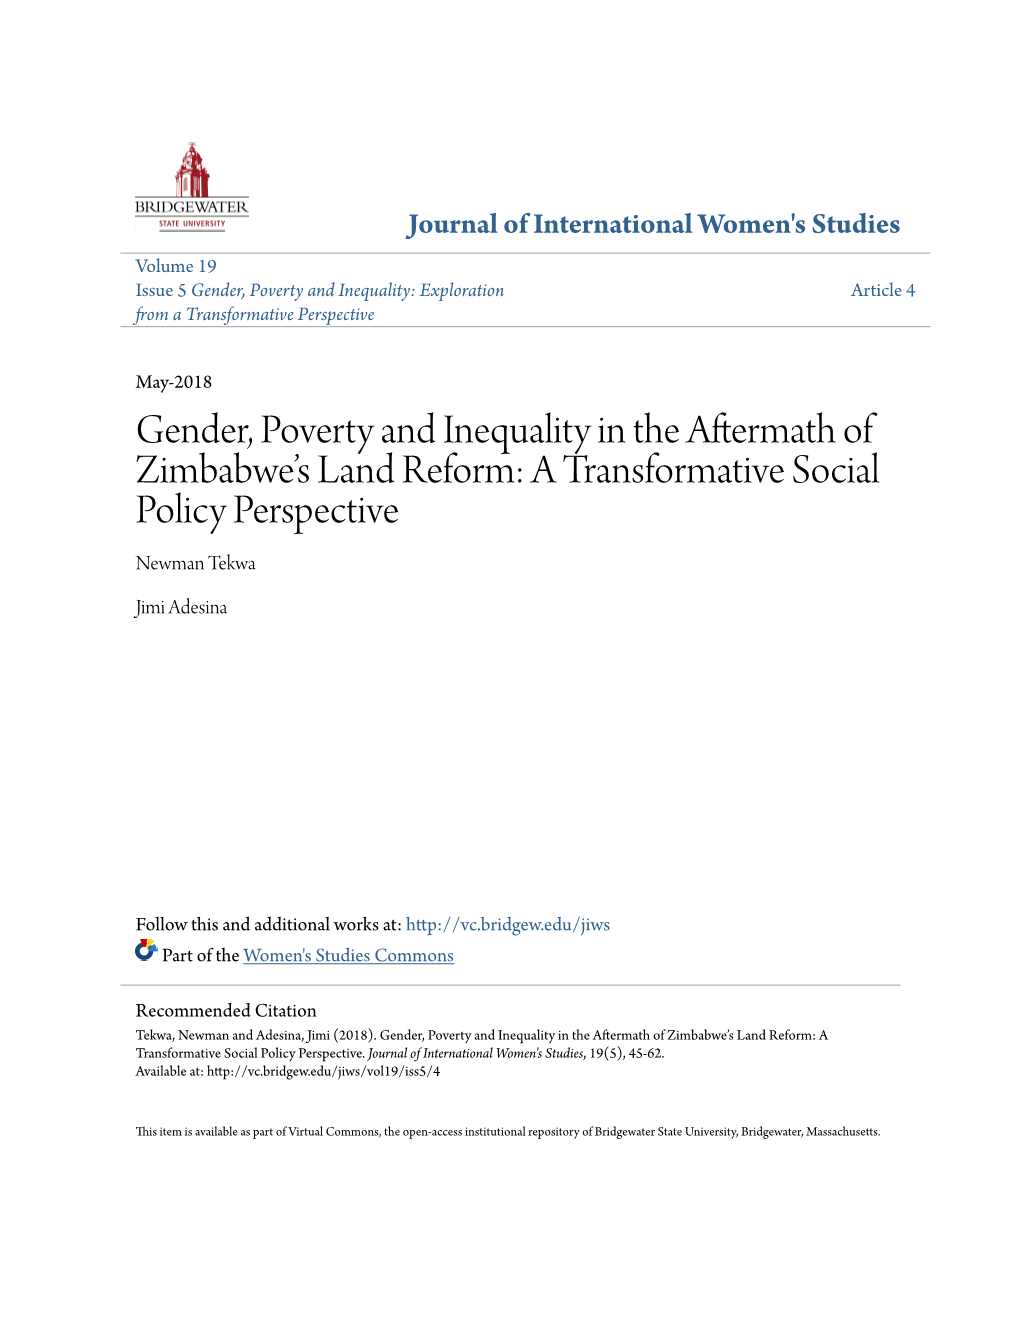 Gender, Poverty and Inequality in the Aftermath of Zimbabwe's Land Reform